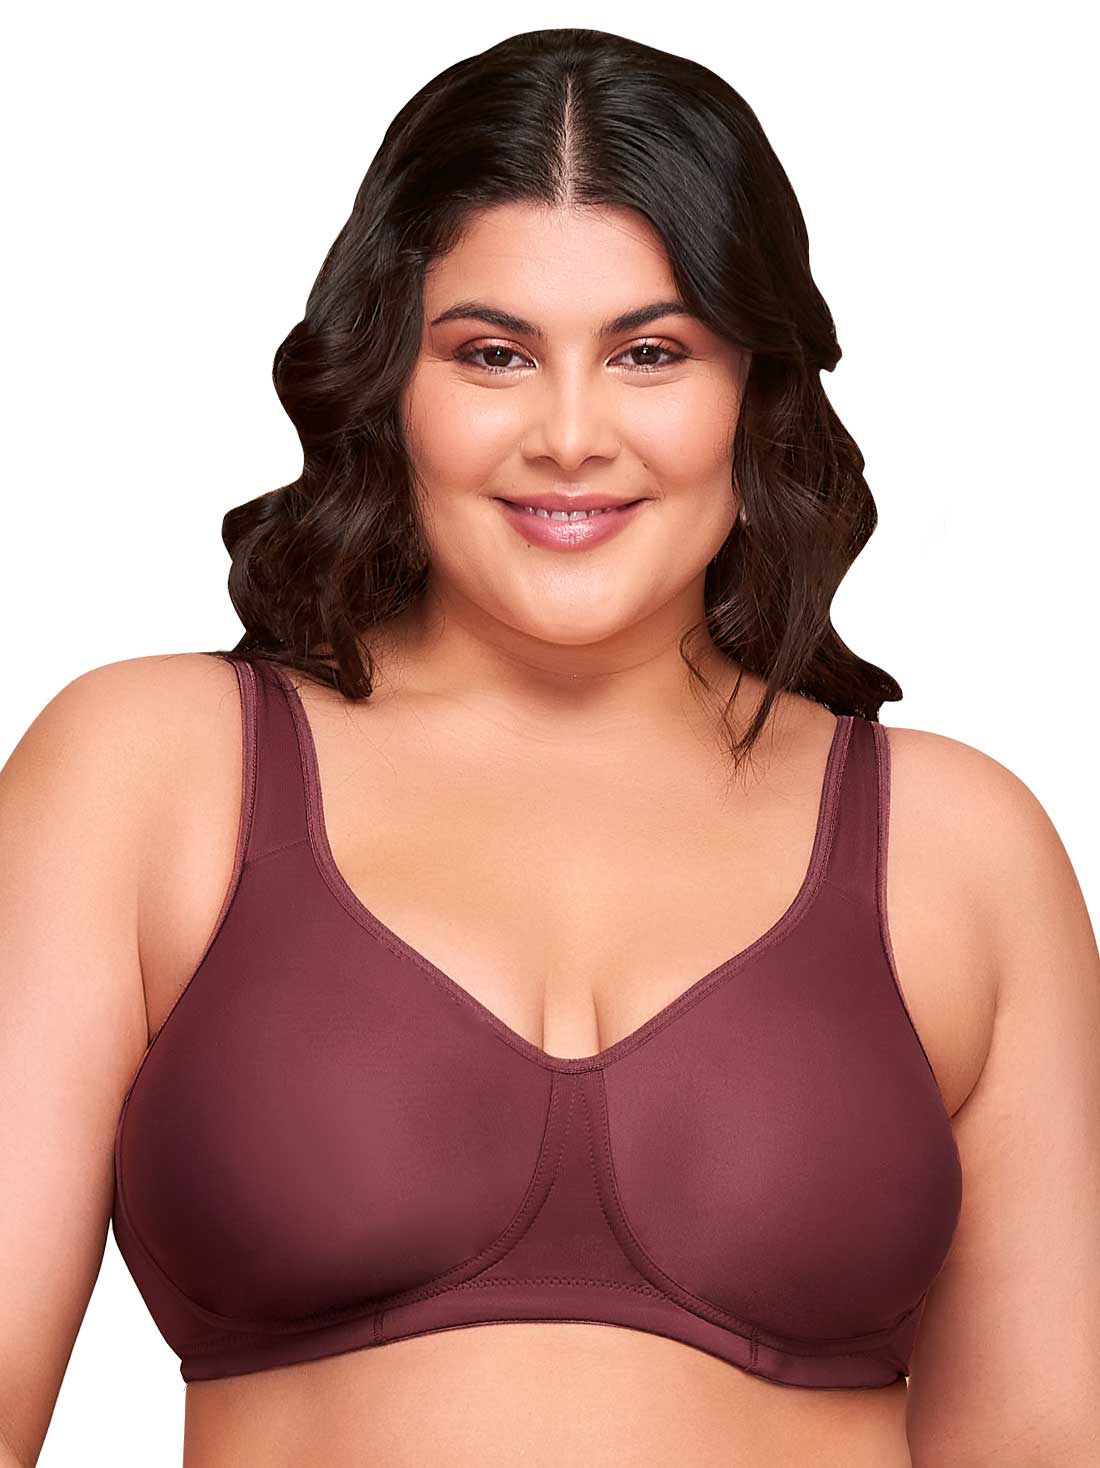 You want to see a supportive non-wired bra? #plussize #sizeinclusive  #inclusivefashion 